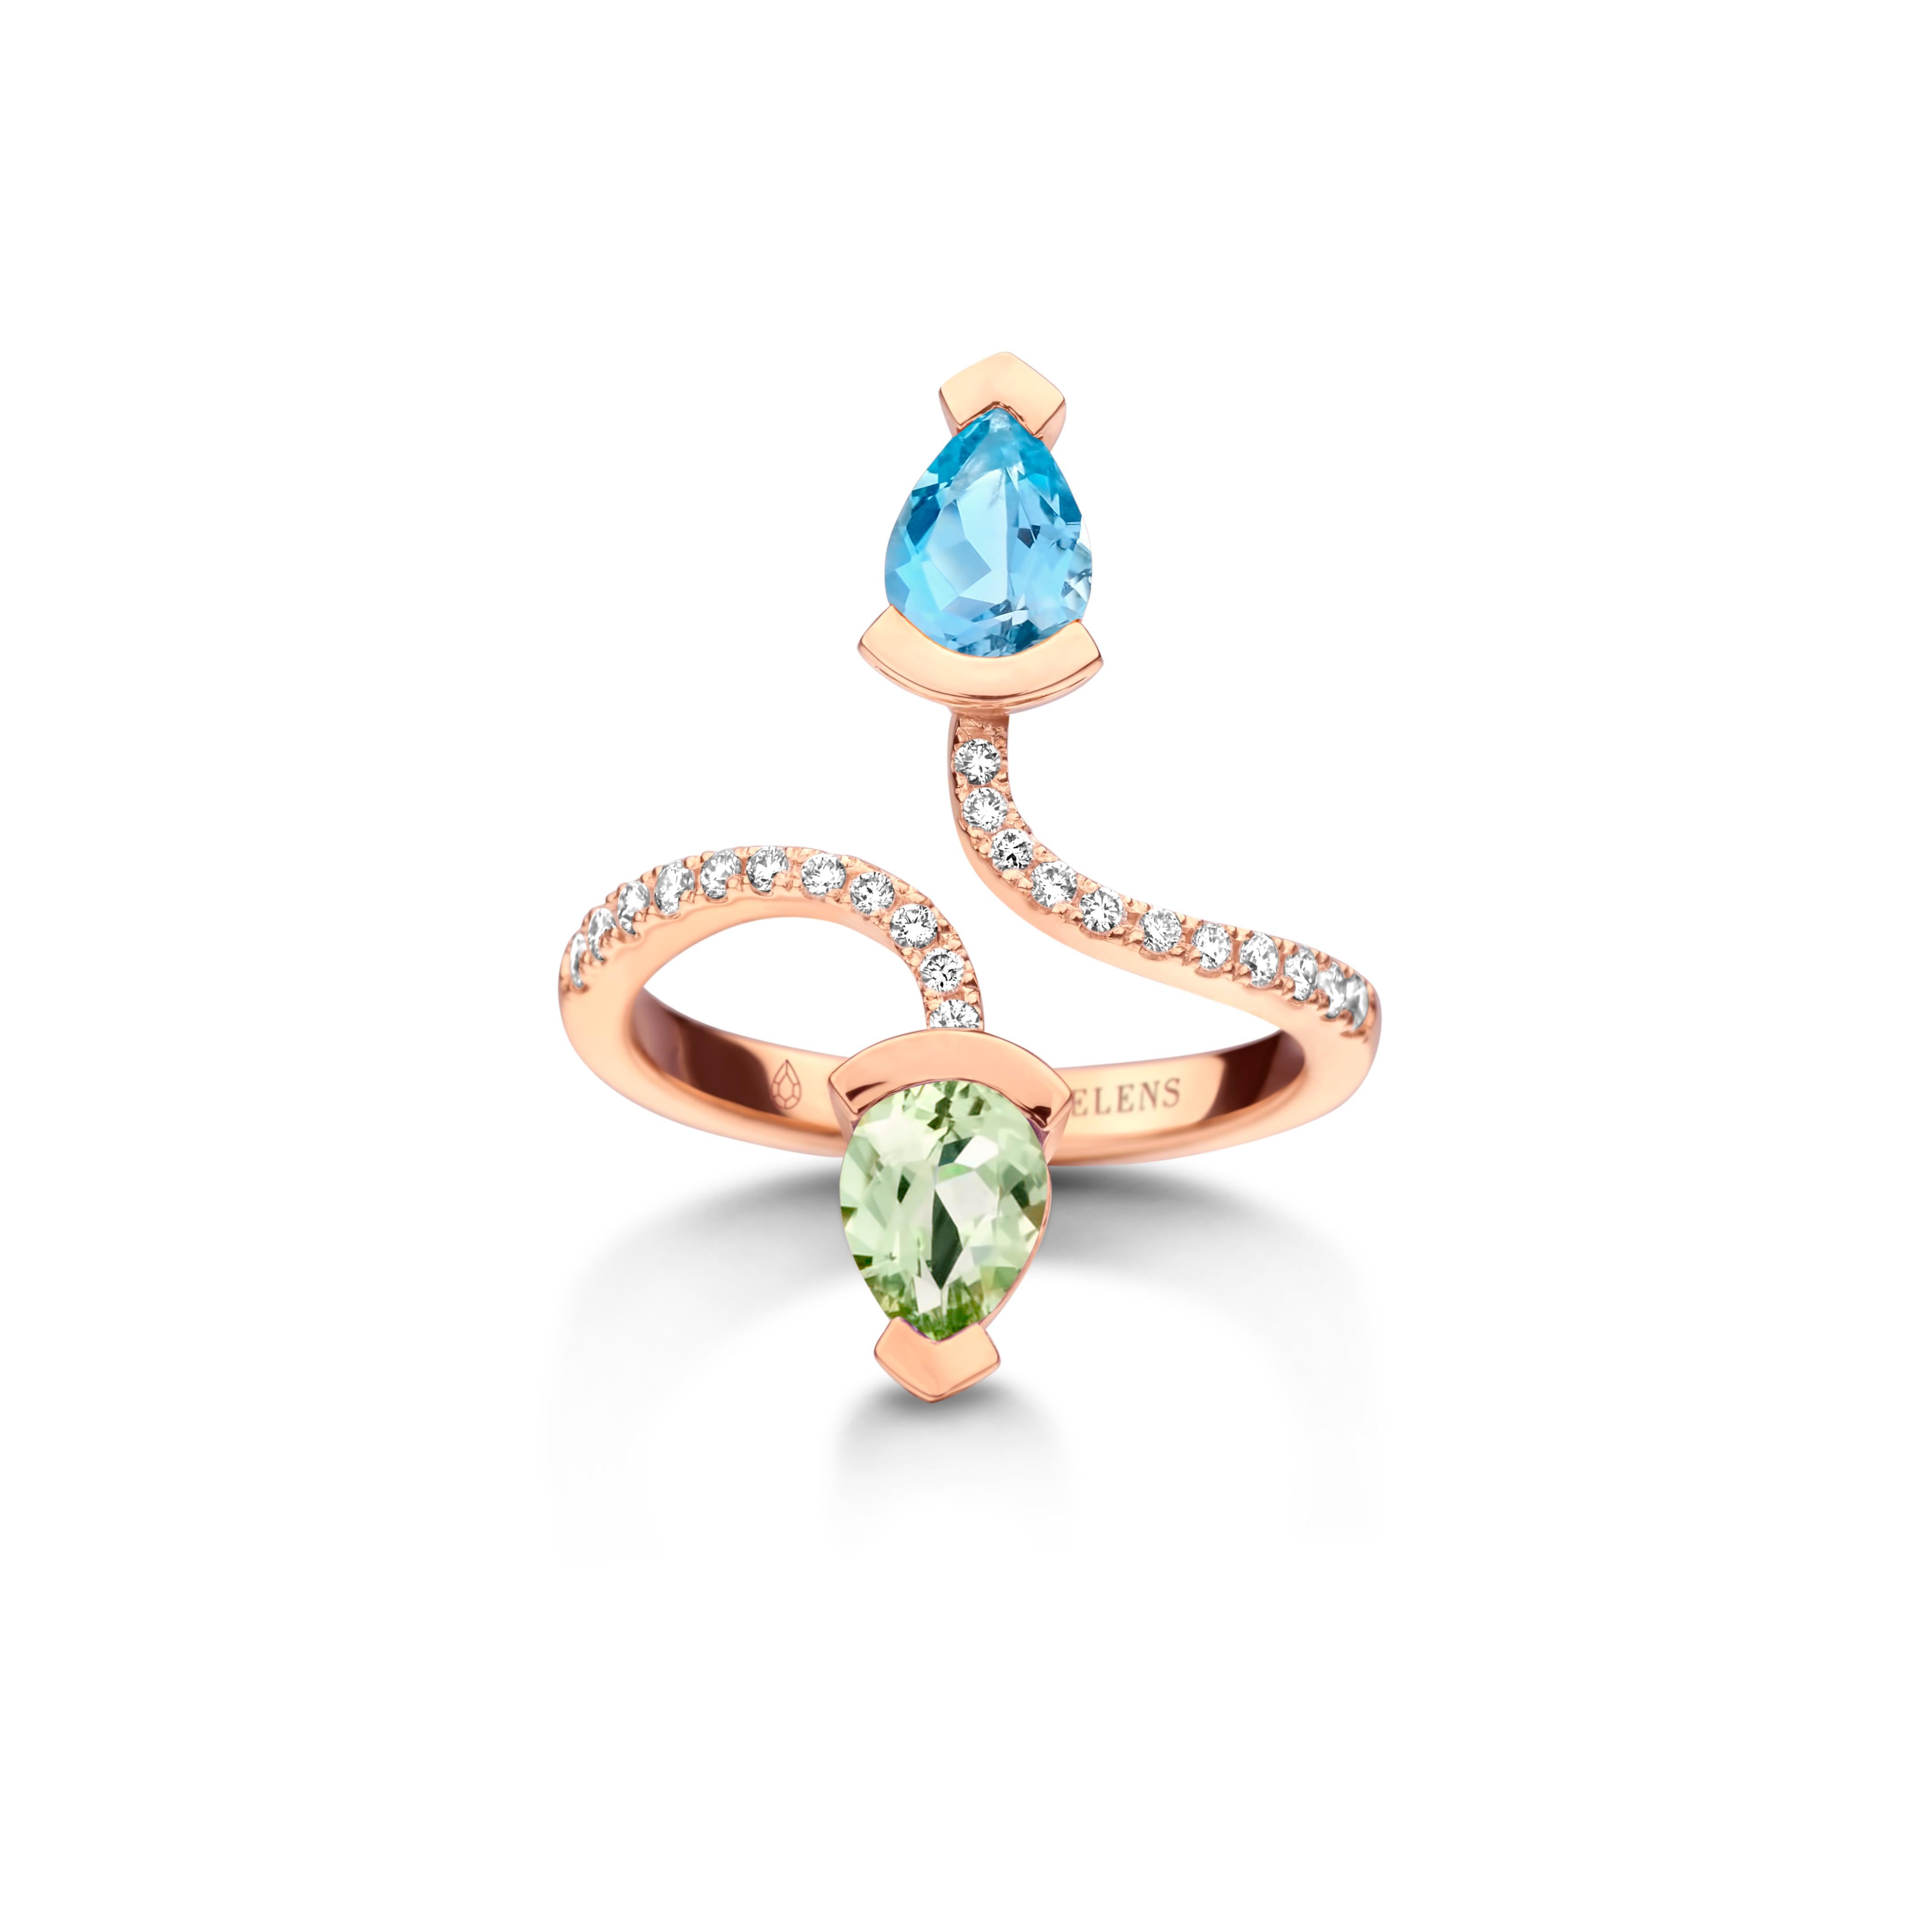 Adeline Duo ring in 18Kt yellow gold 5g set with a pear-shaped aquamarine 0,70 Ct, a pear-shaped green beryl 0,70 Ct and 0,19 Ct of white brilliant cut diamonds - VS F quality. Celine Roelens, a goldsmith and gemologist, is specialized in unique,